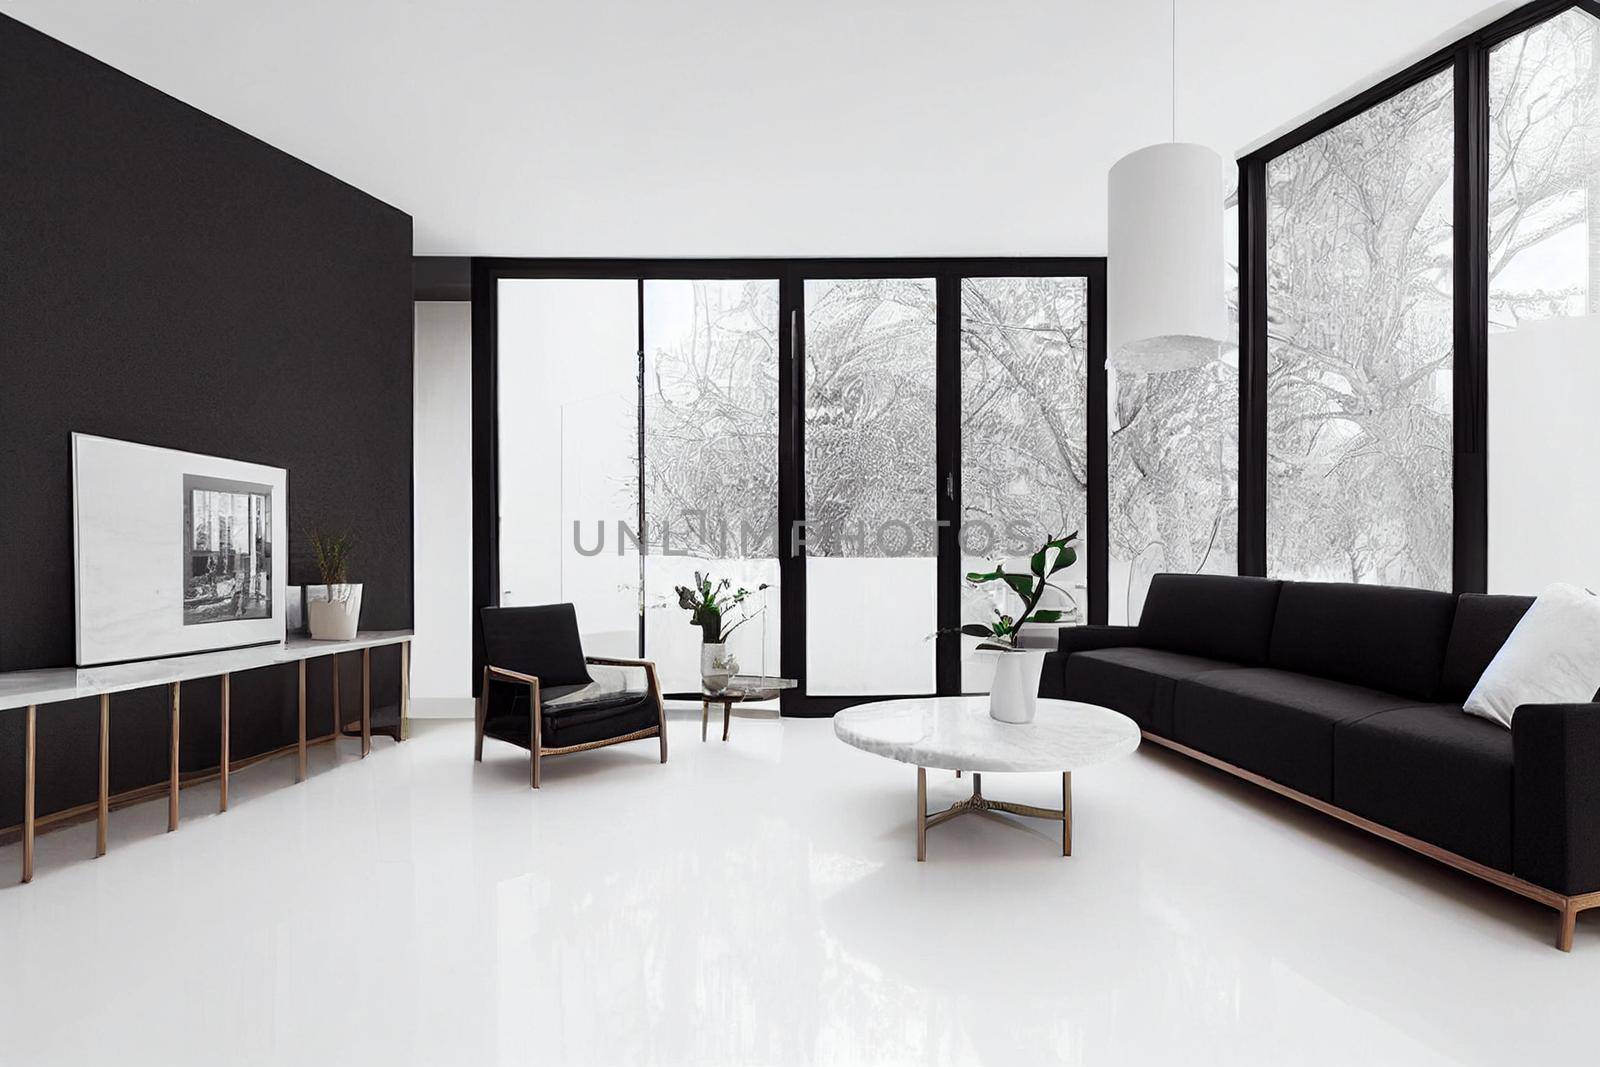 Modern living room 3D render with white luxurious furniture, white glossy marble floor and creative wooden chairs